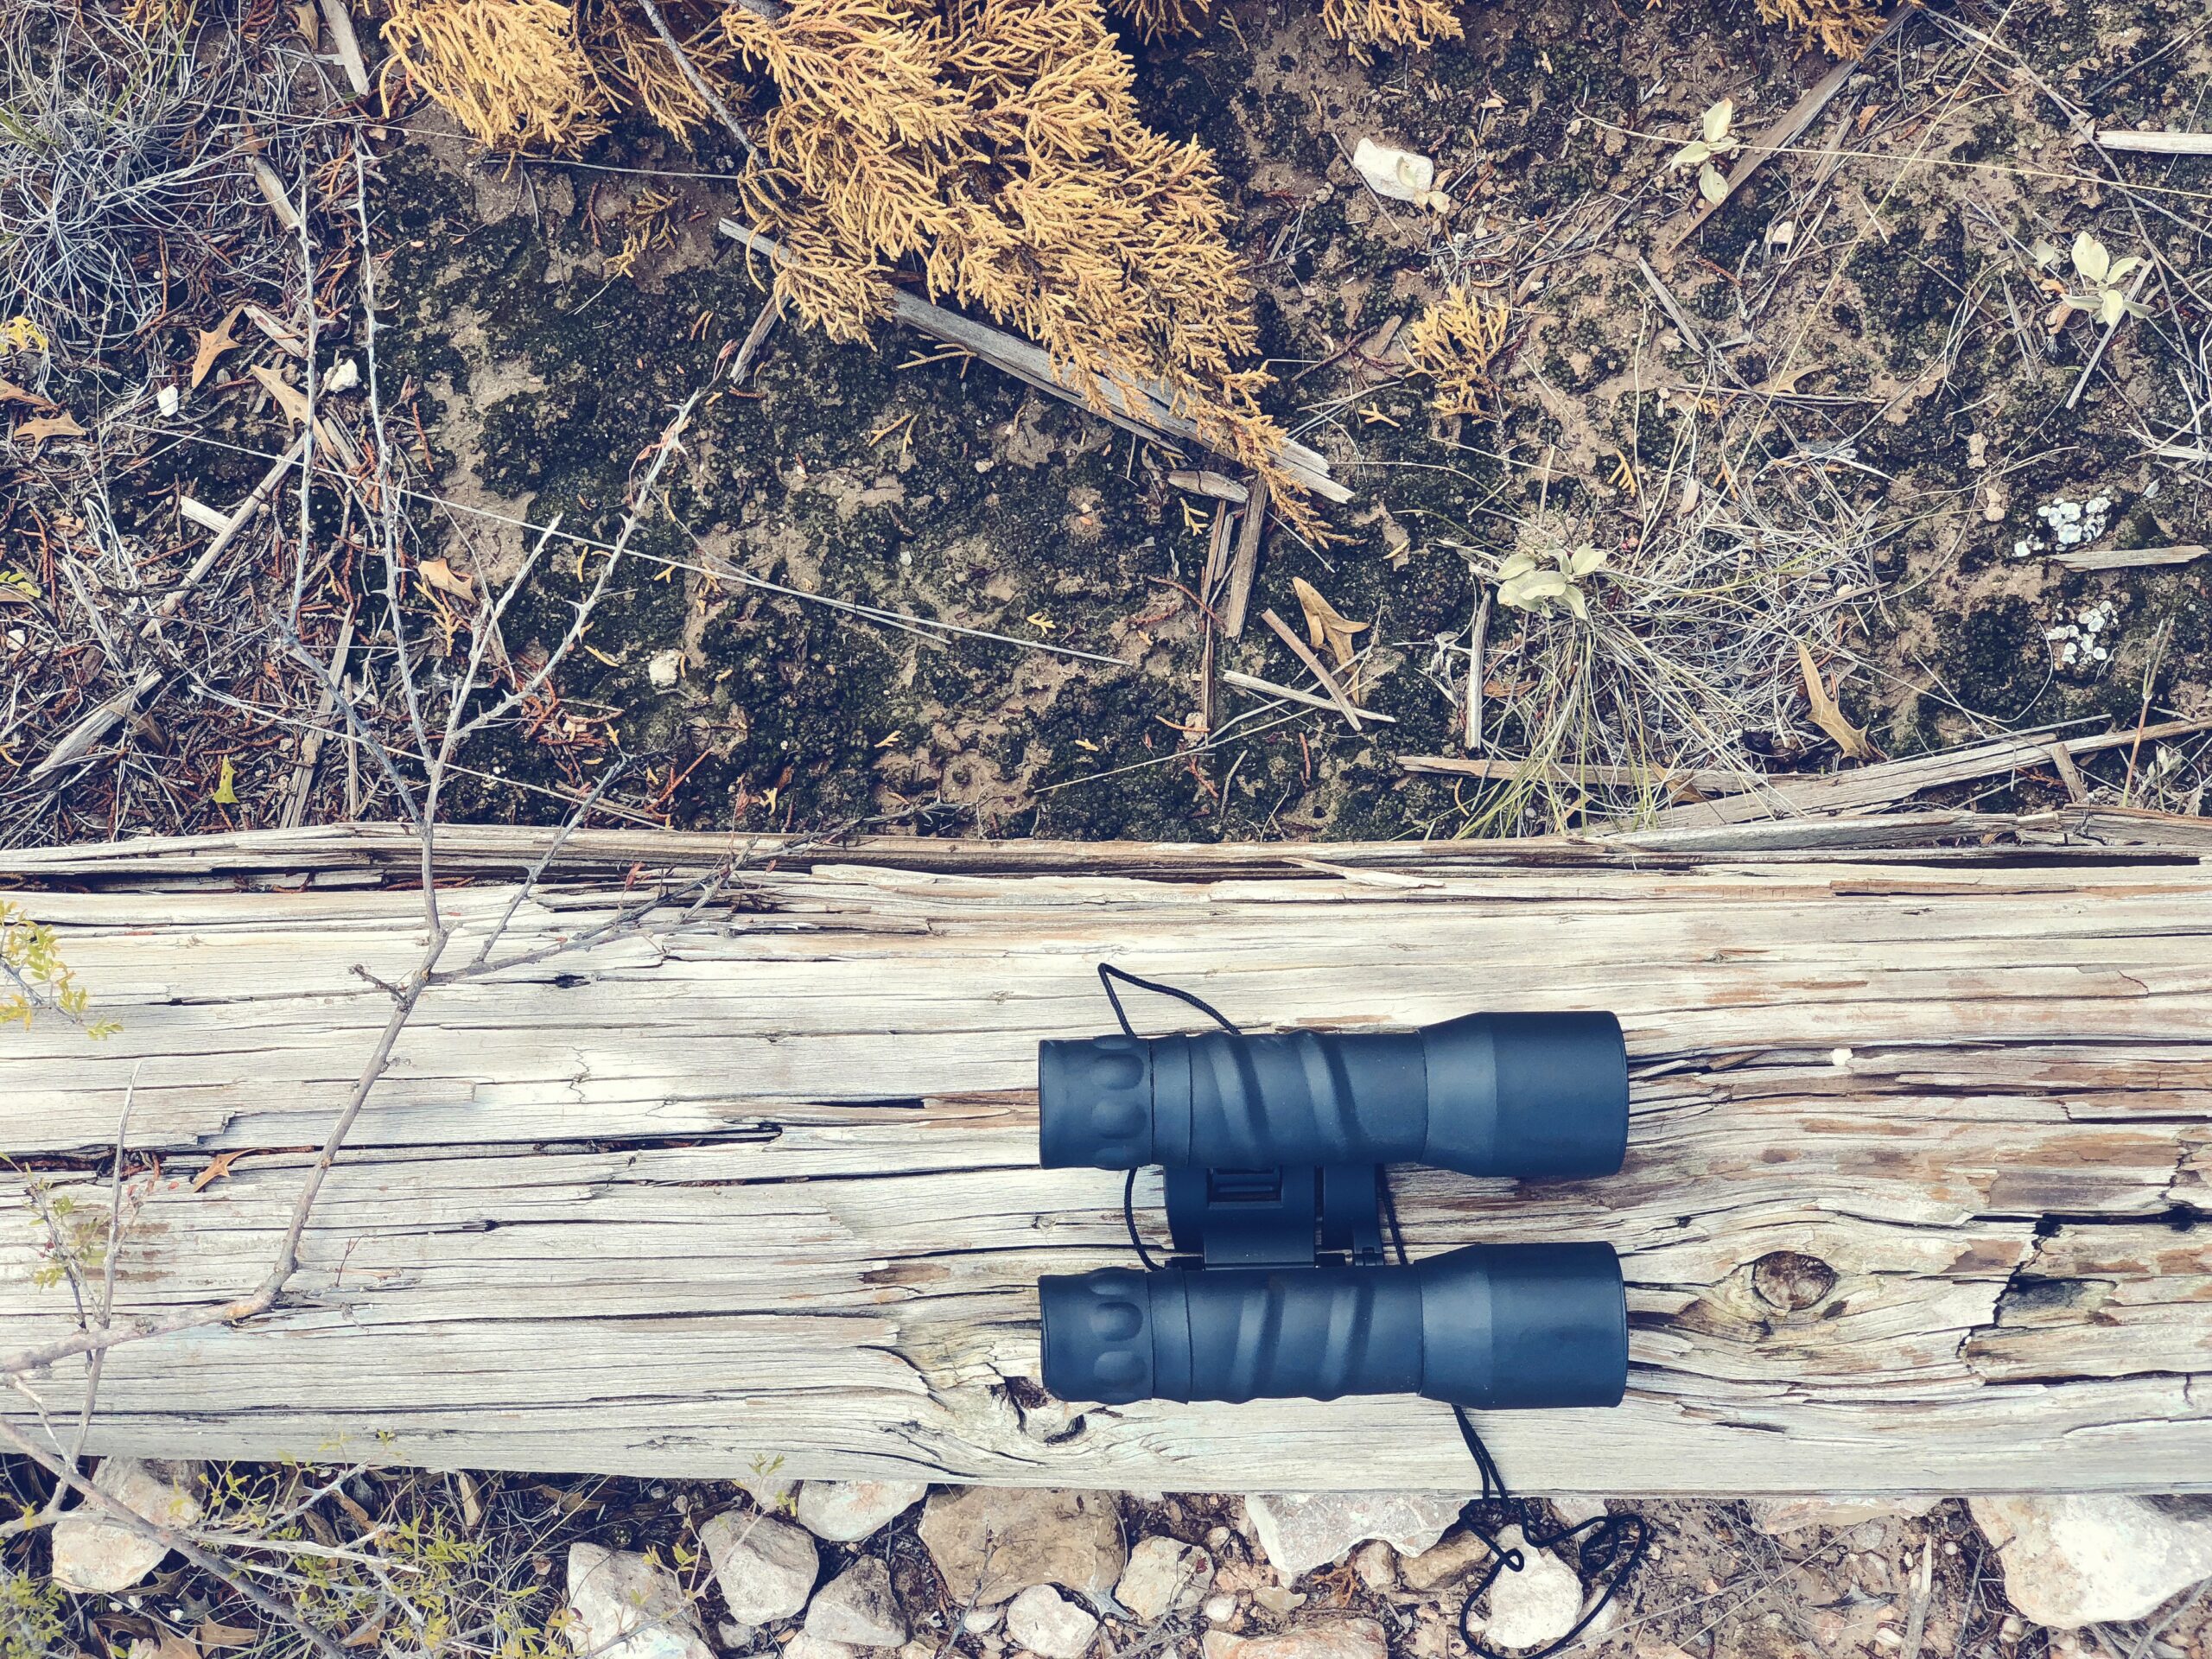 What Are Some Signs Of A Defective Prism System In Birding Binoculars?